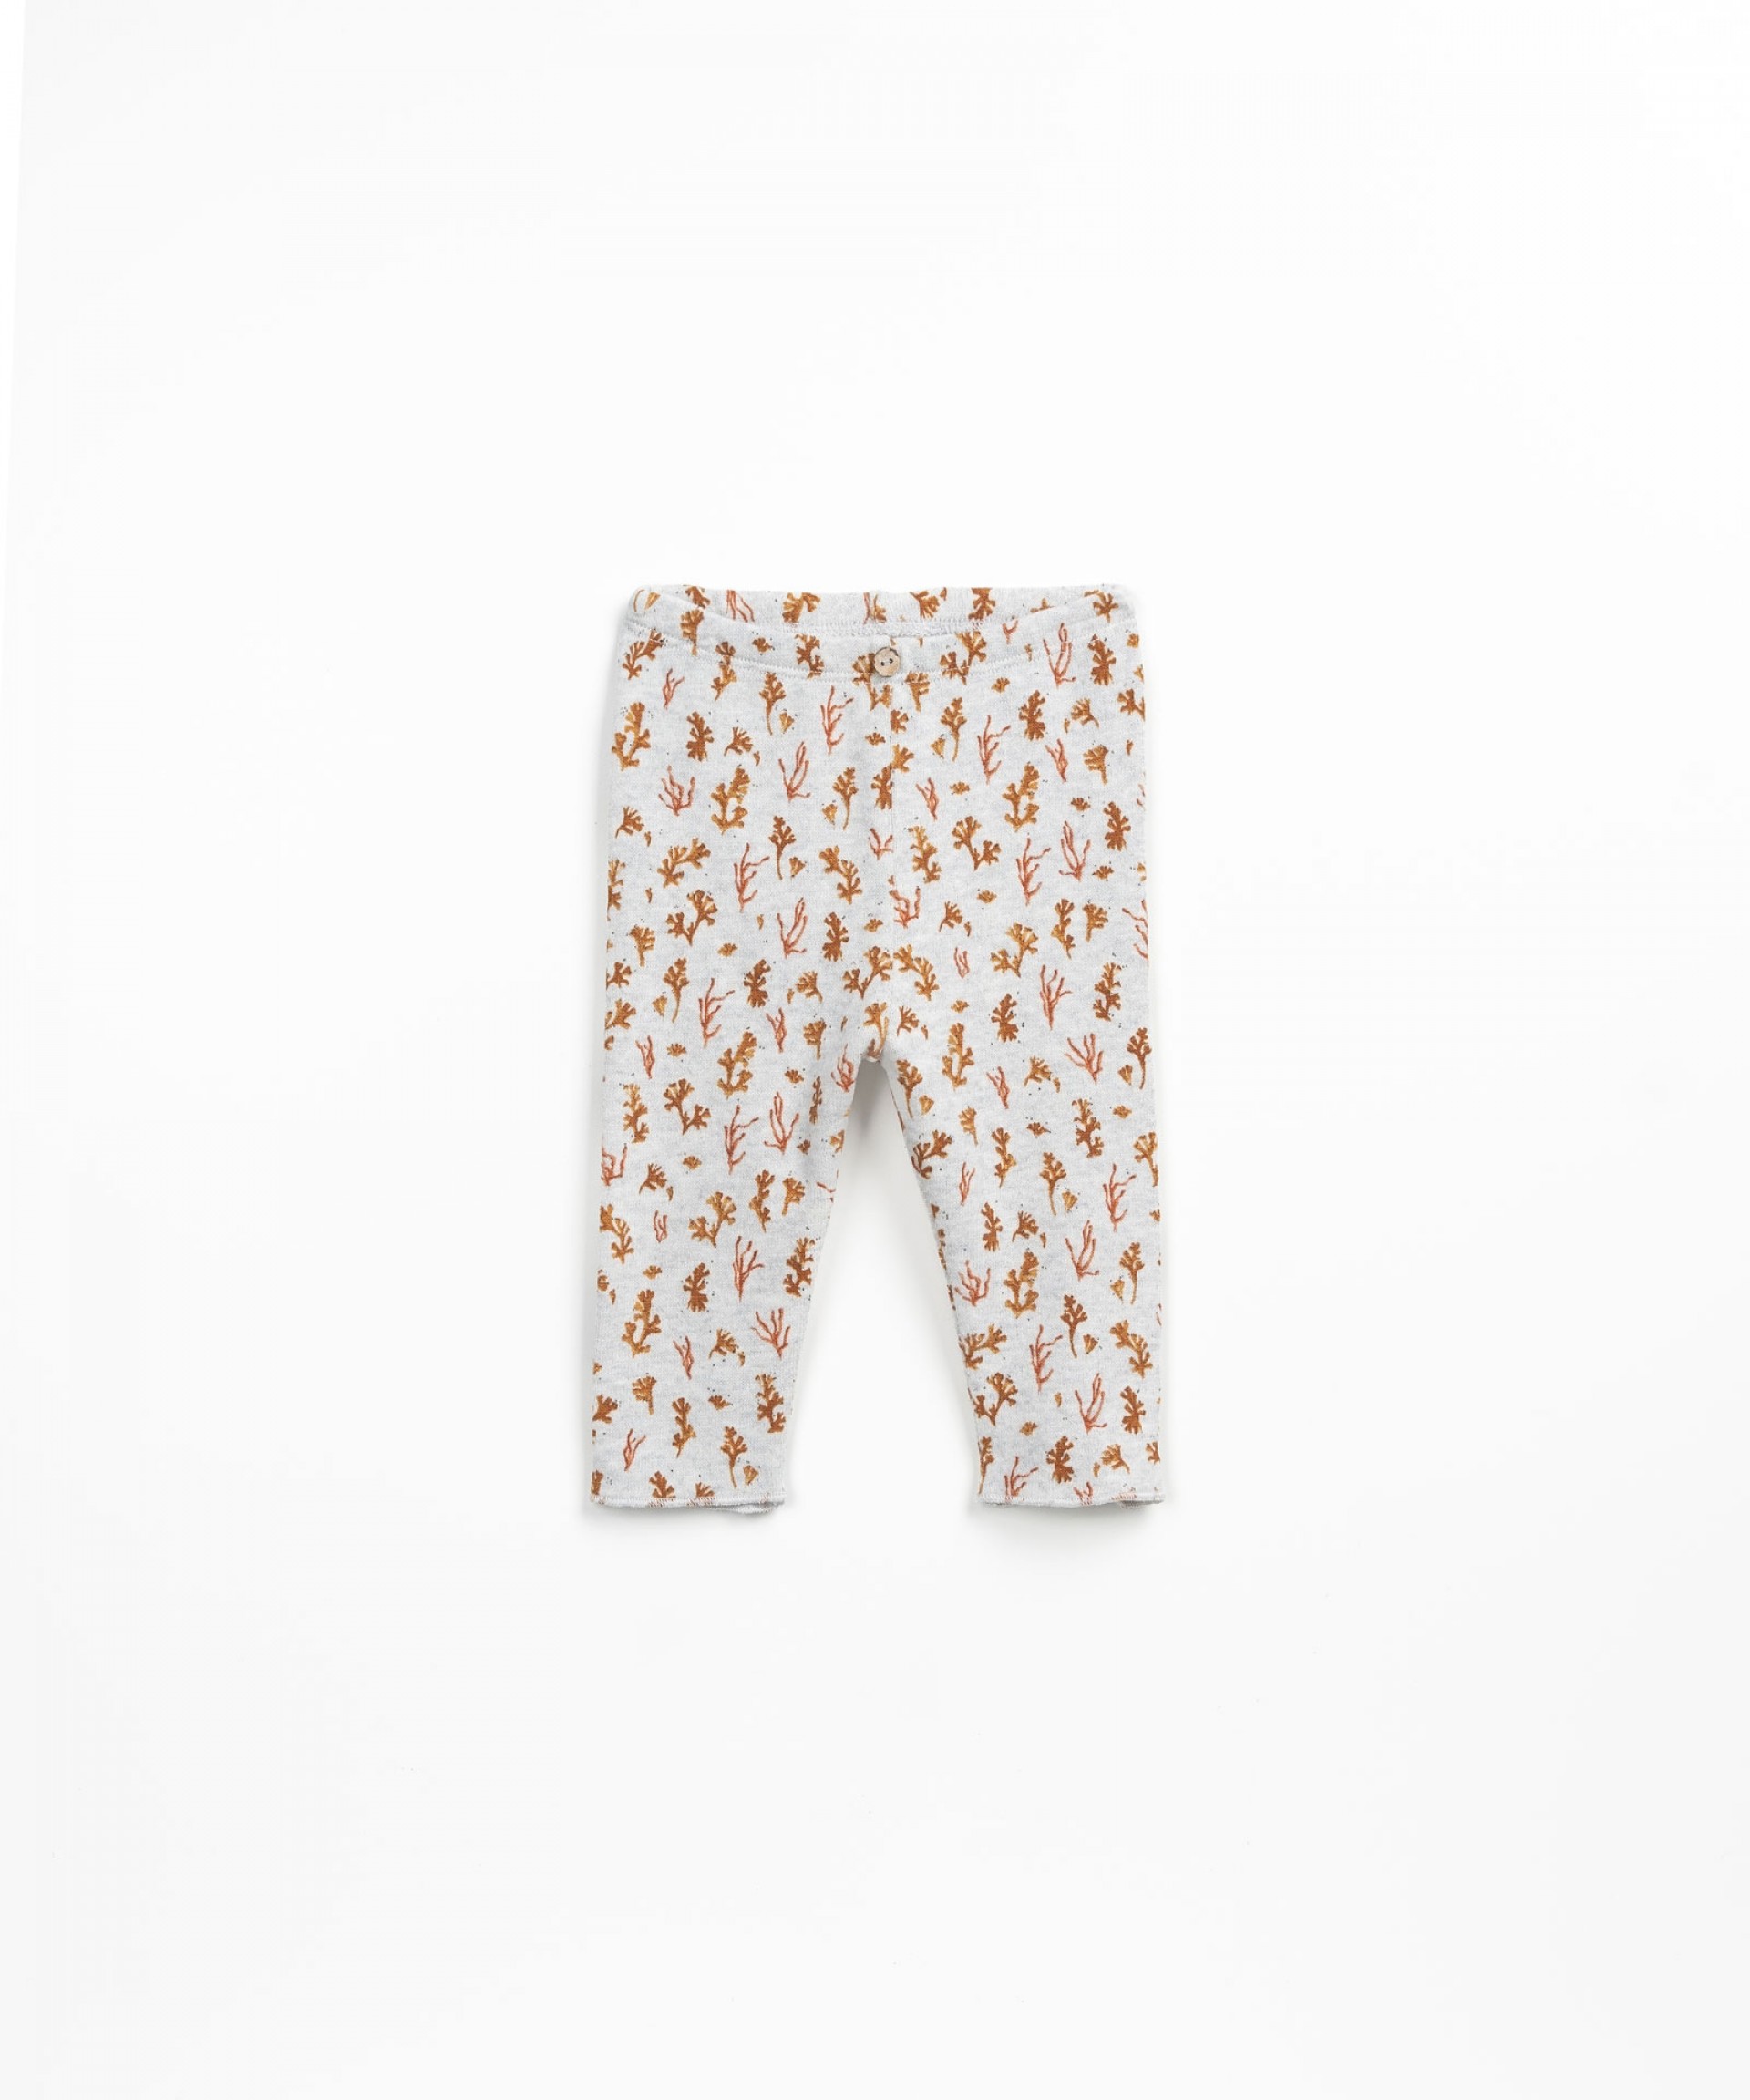 Leggings with coral print | Textile Art